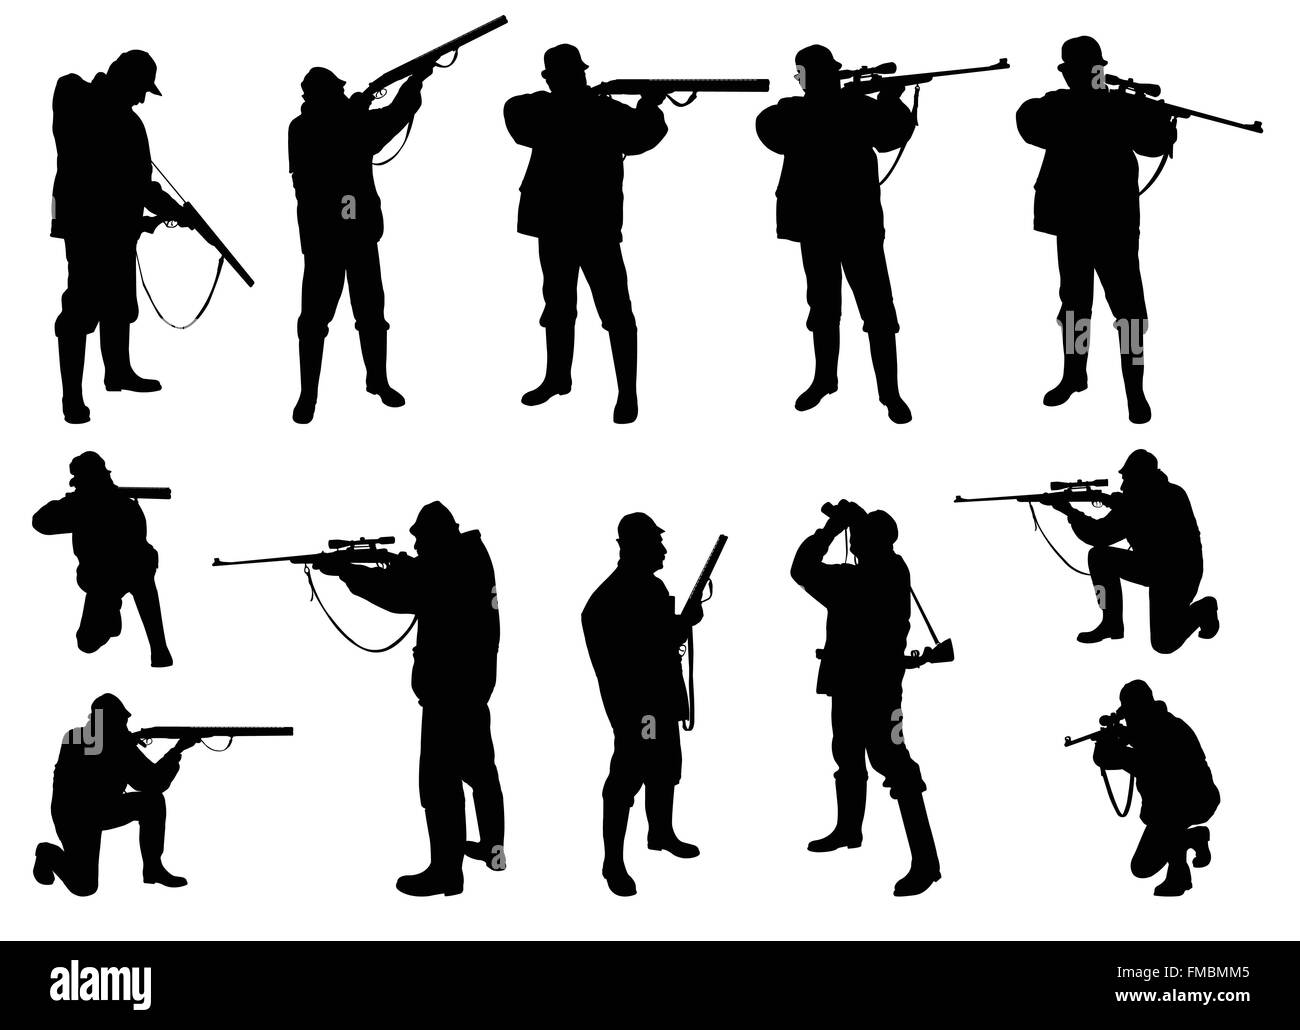 hunters silhouettes collection - vector Stock Vector